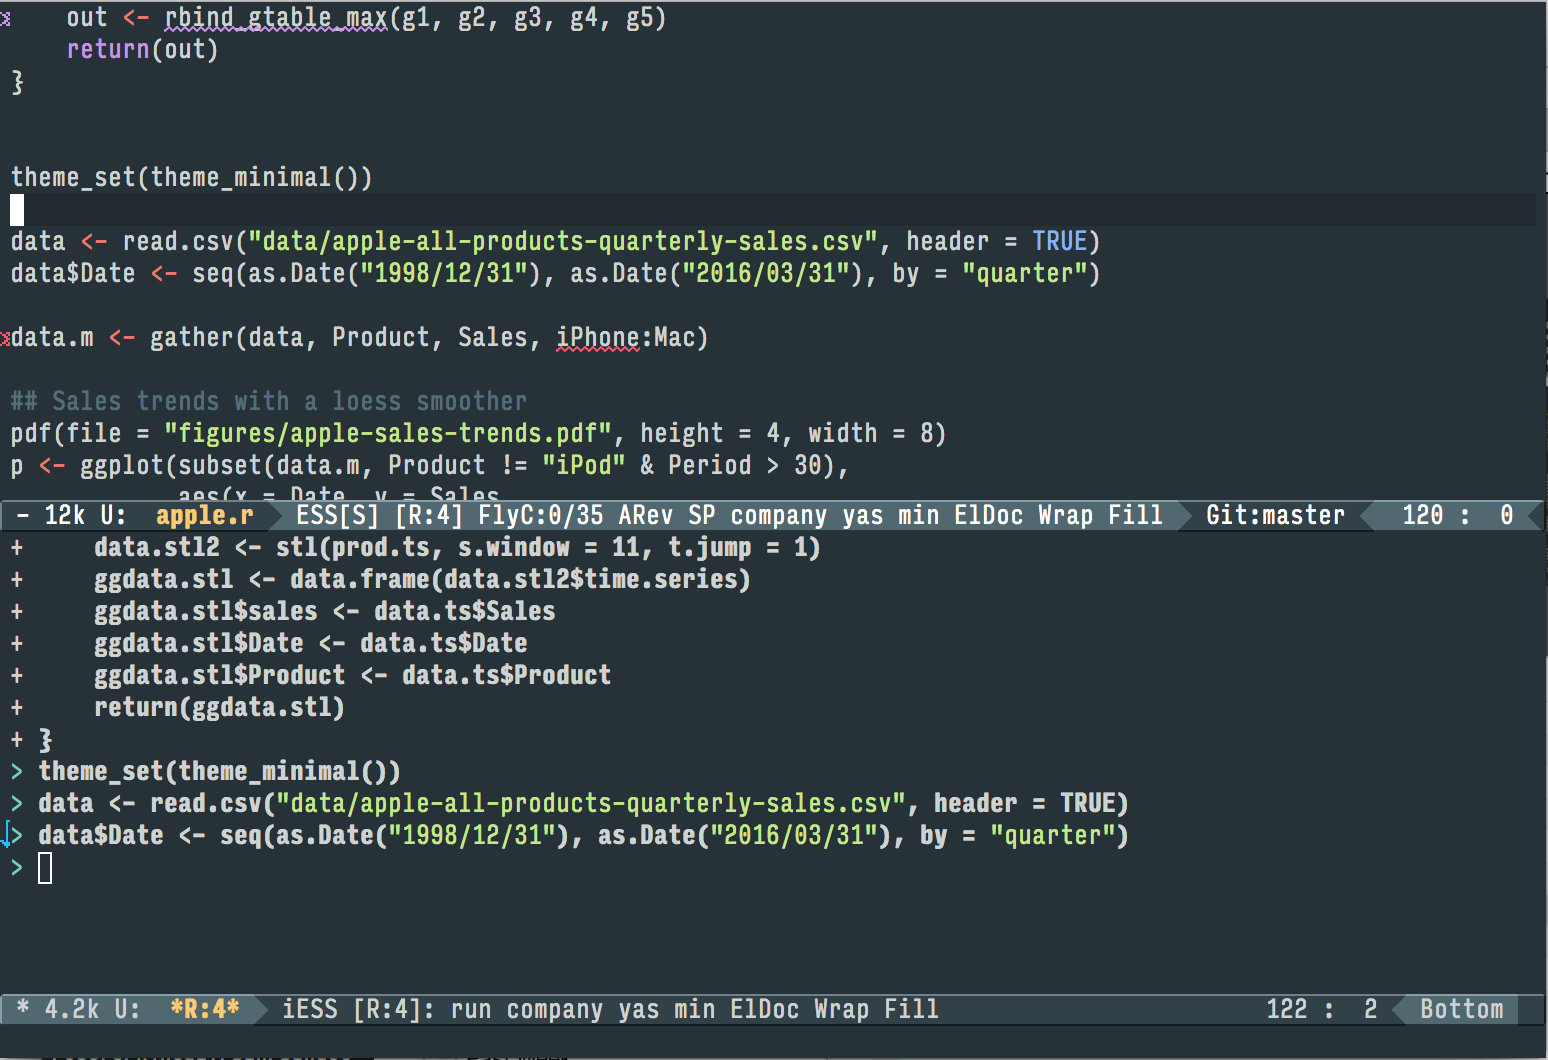 Working with R in Emacs using ESS. A document containing R code is open in the top half of the screen. Below the divider, an R session is running, also inside Emacs. Code from the top pane is sent to the bottom with a keyboard shortcut, where it is evaluated by R. We can also jump down to the bottom pane and do work there. Small details like a lint checker, active line highlighting, and revision-control information are also visible.